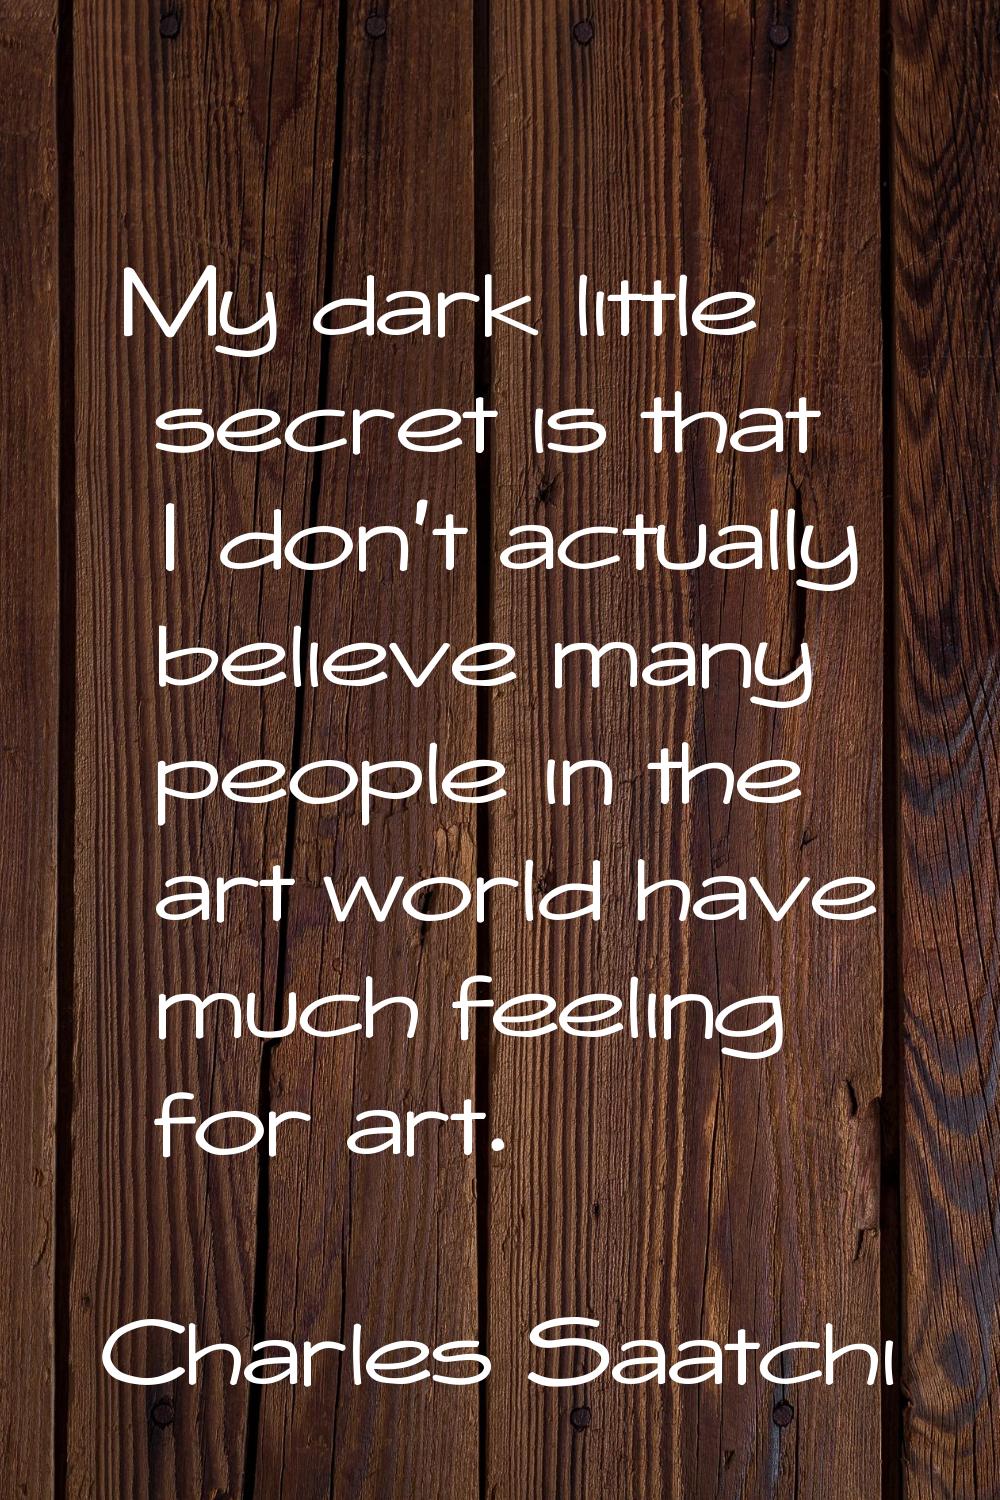 My dark little secret is that I don't actually believe many people in the art world have much feeli